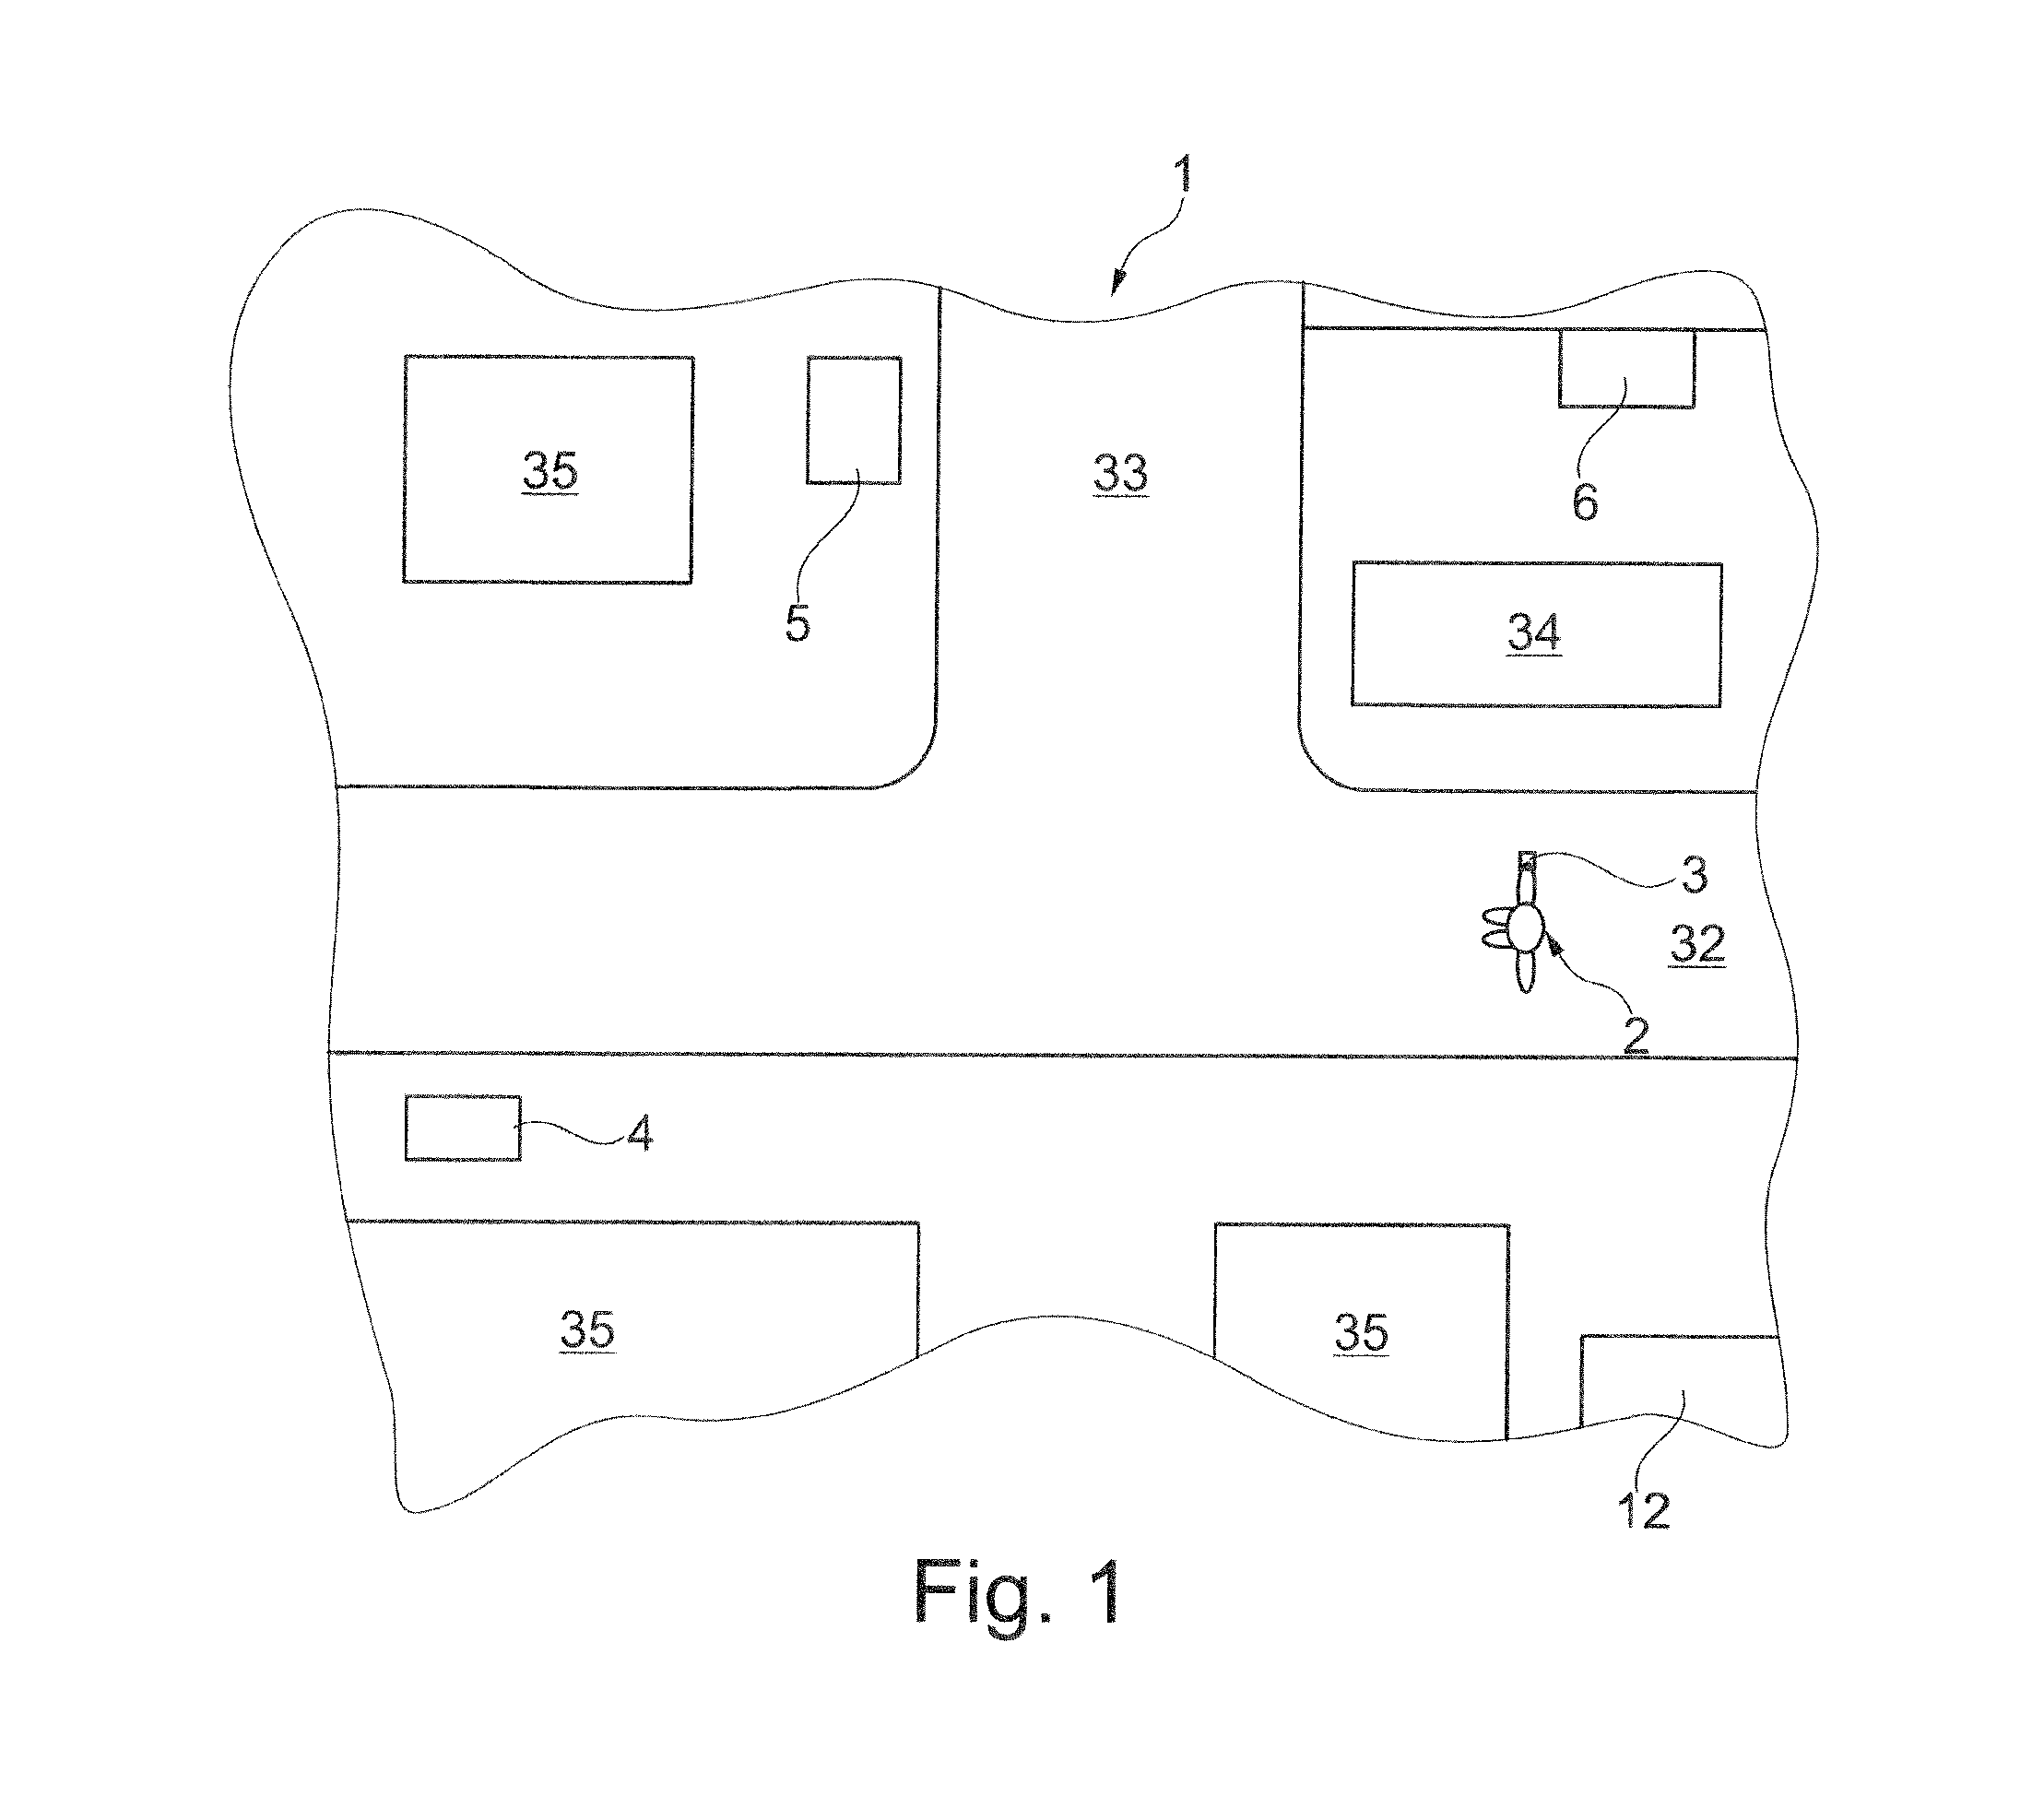 Method for operating an emergency call system, emergency call system